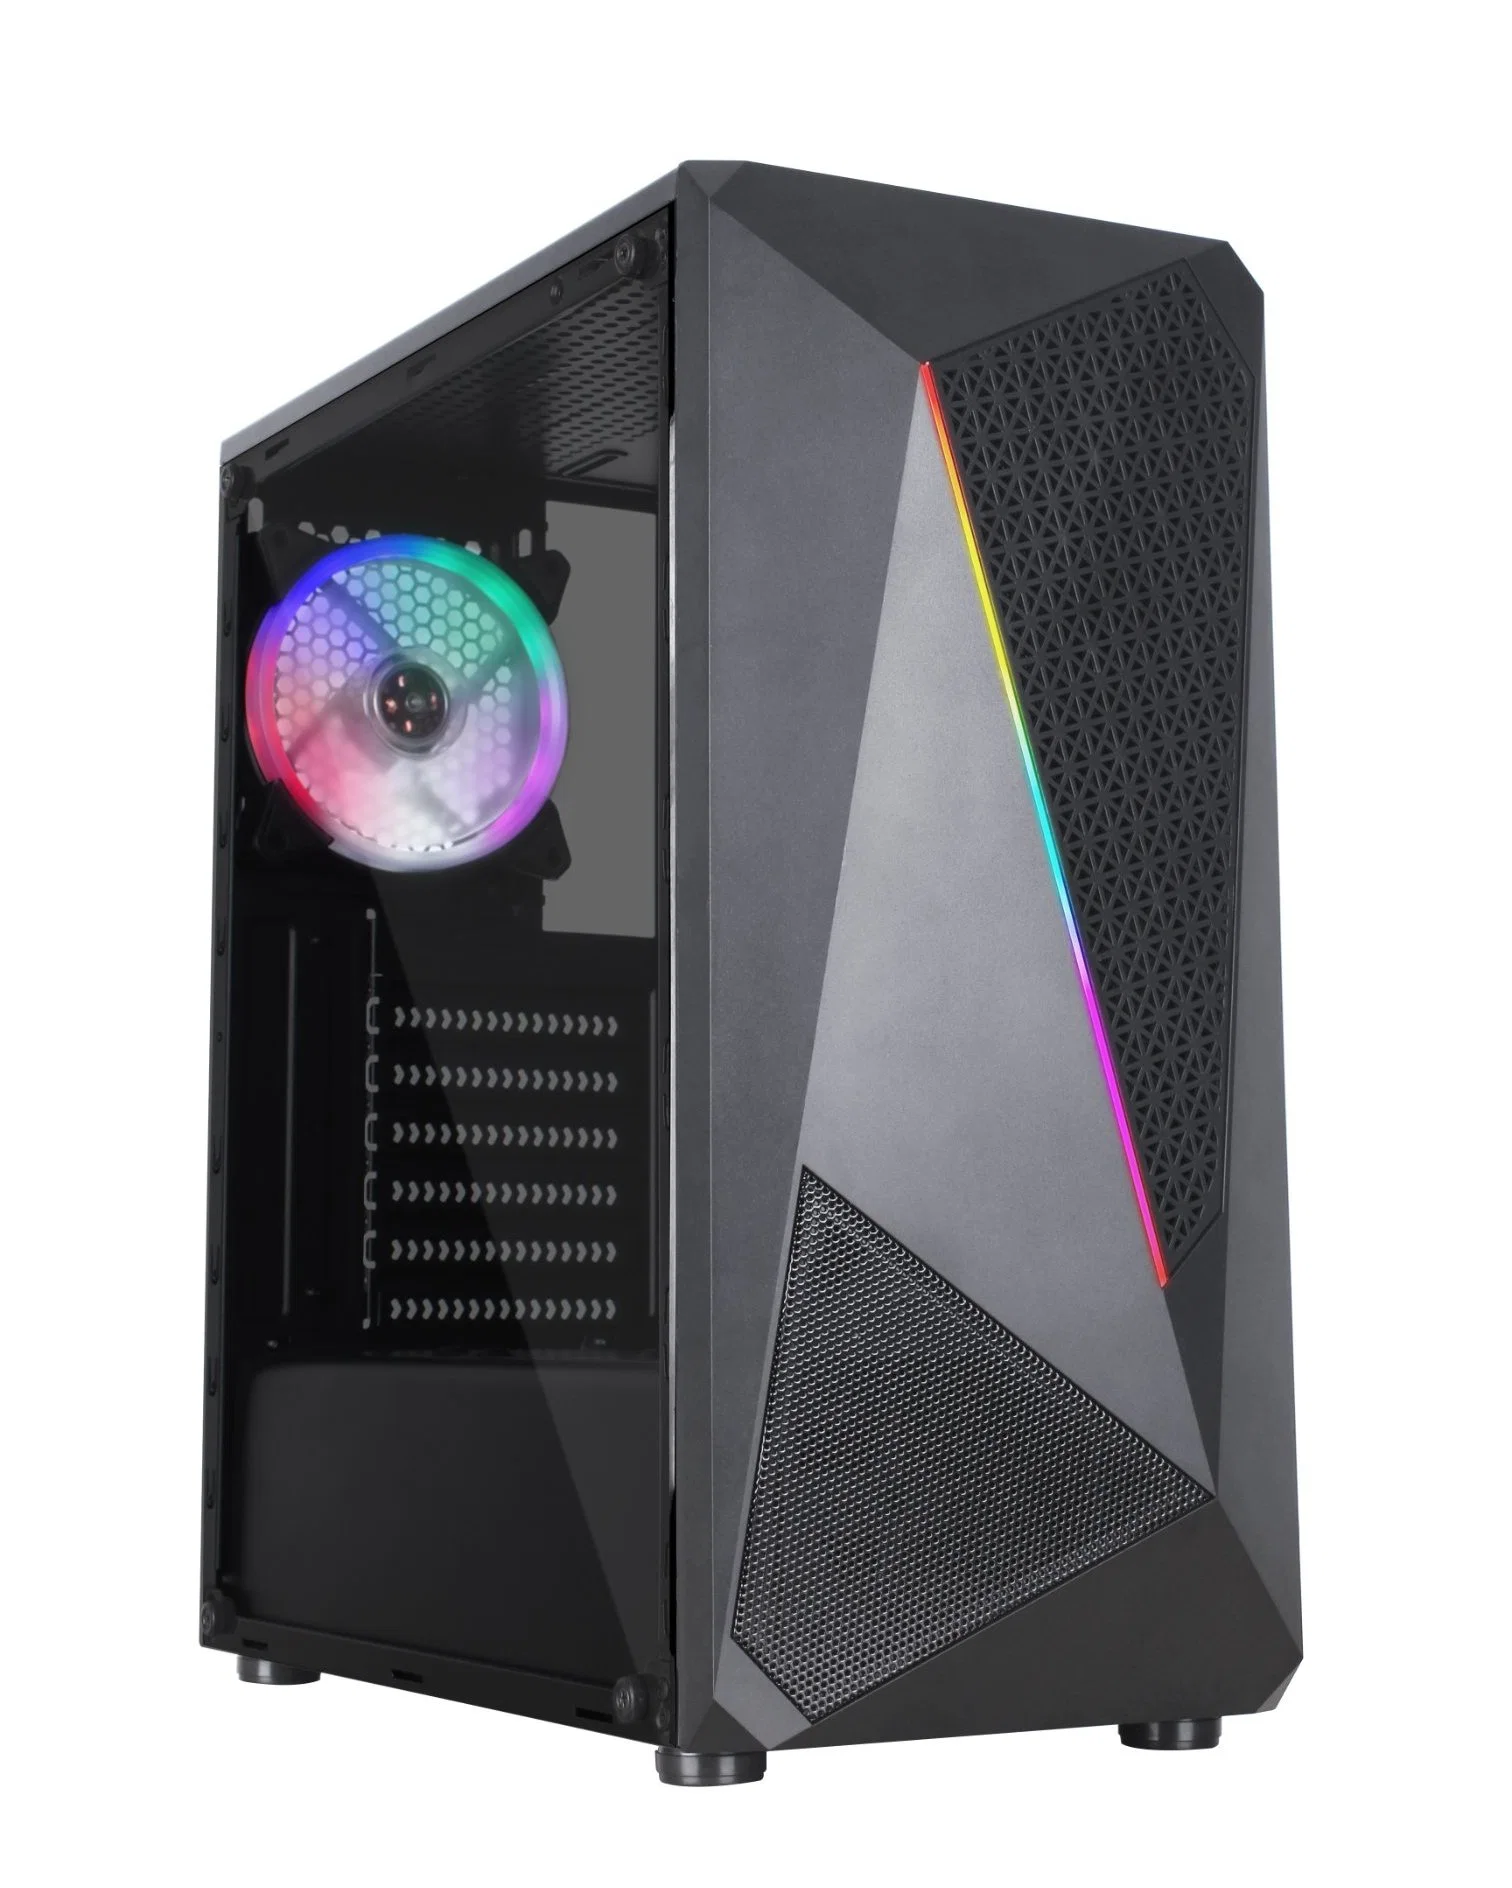 Irregular Gaming Cases Computer Product PC Case with LED Strip